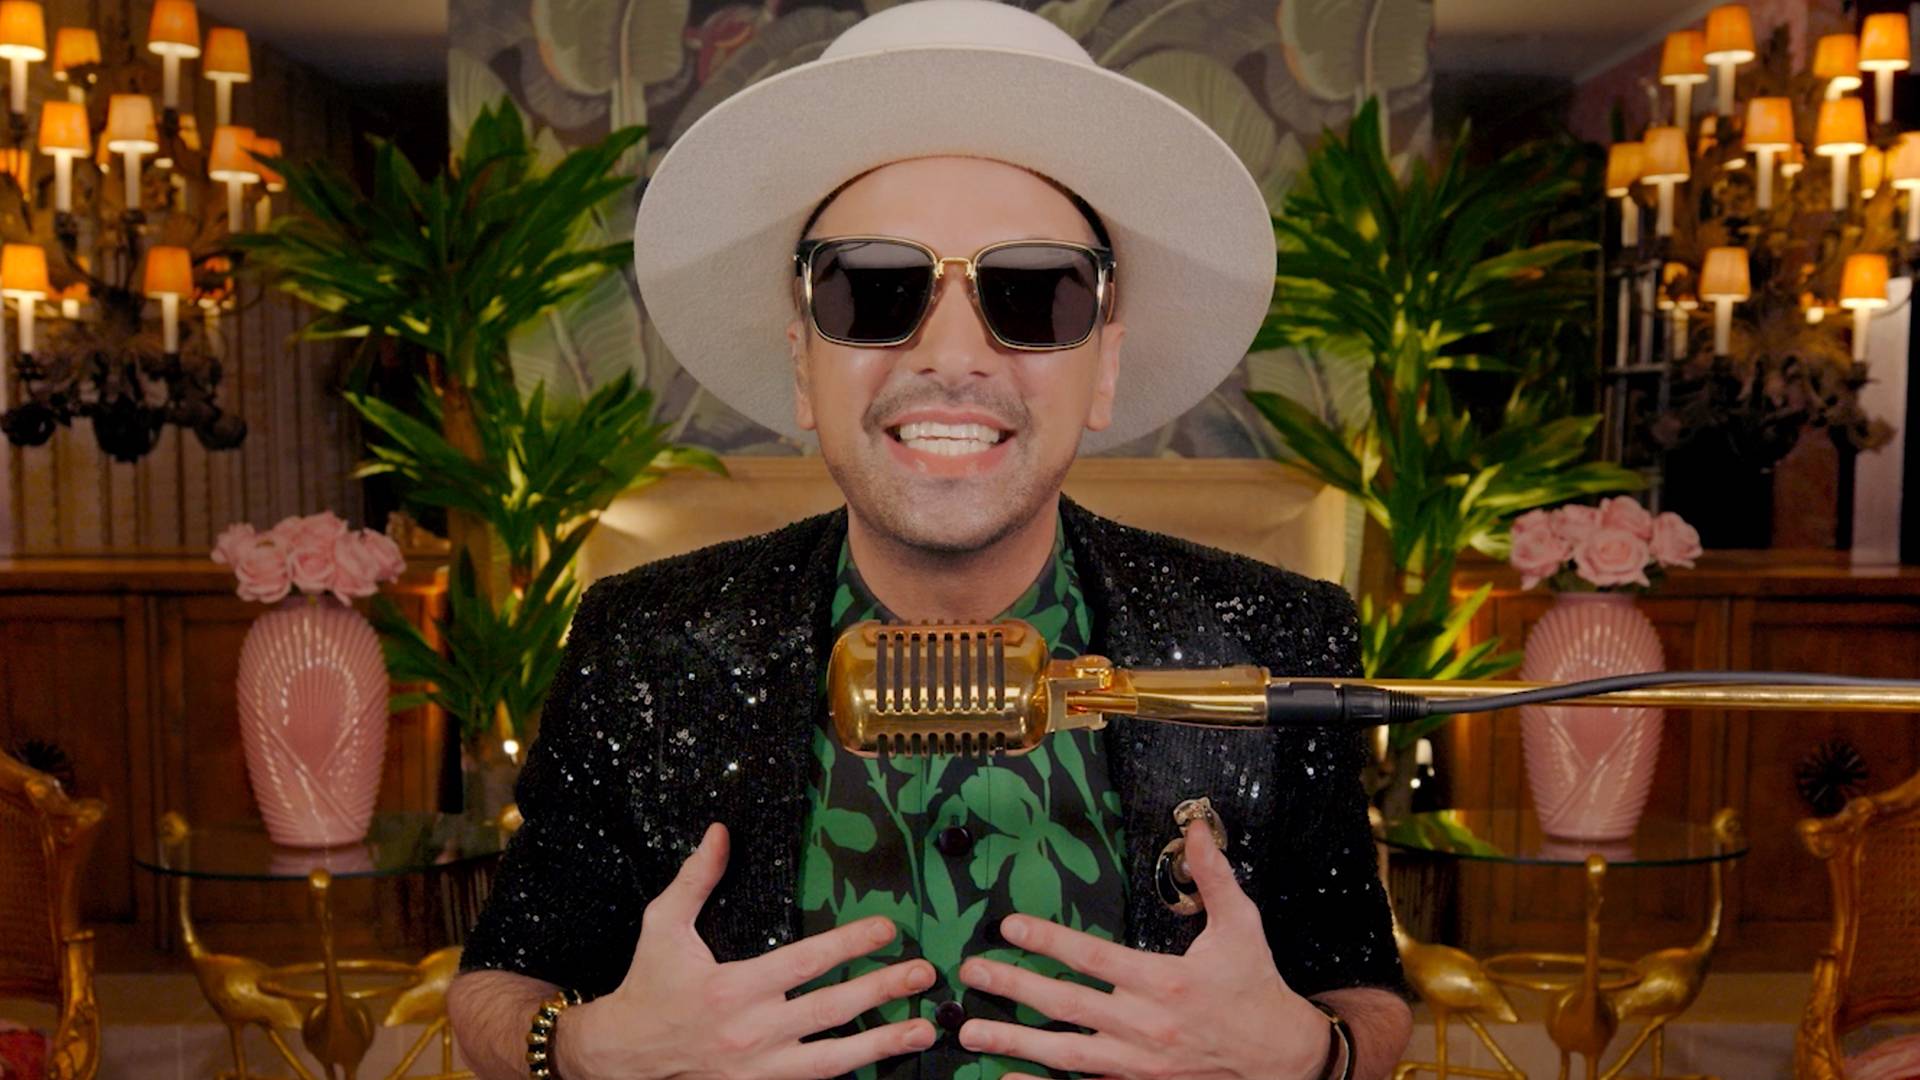 DJ Cassidy wearing a black jacket, black and green shirt, and a white hat while hosting DJ Cassidy's Pass the Mic: 2021 BET Soul Train Edition.